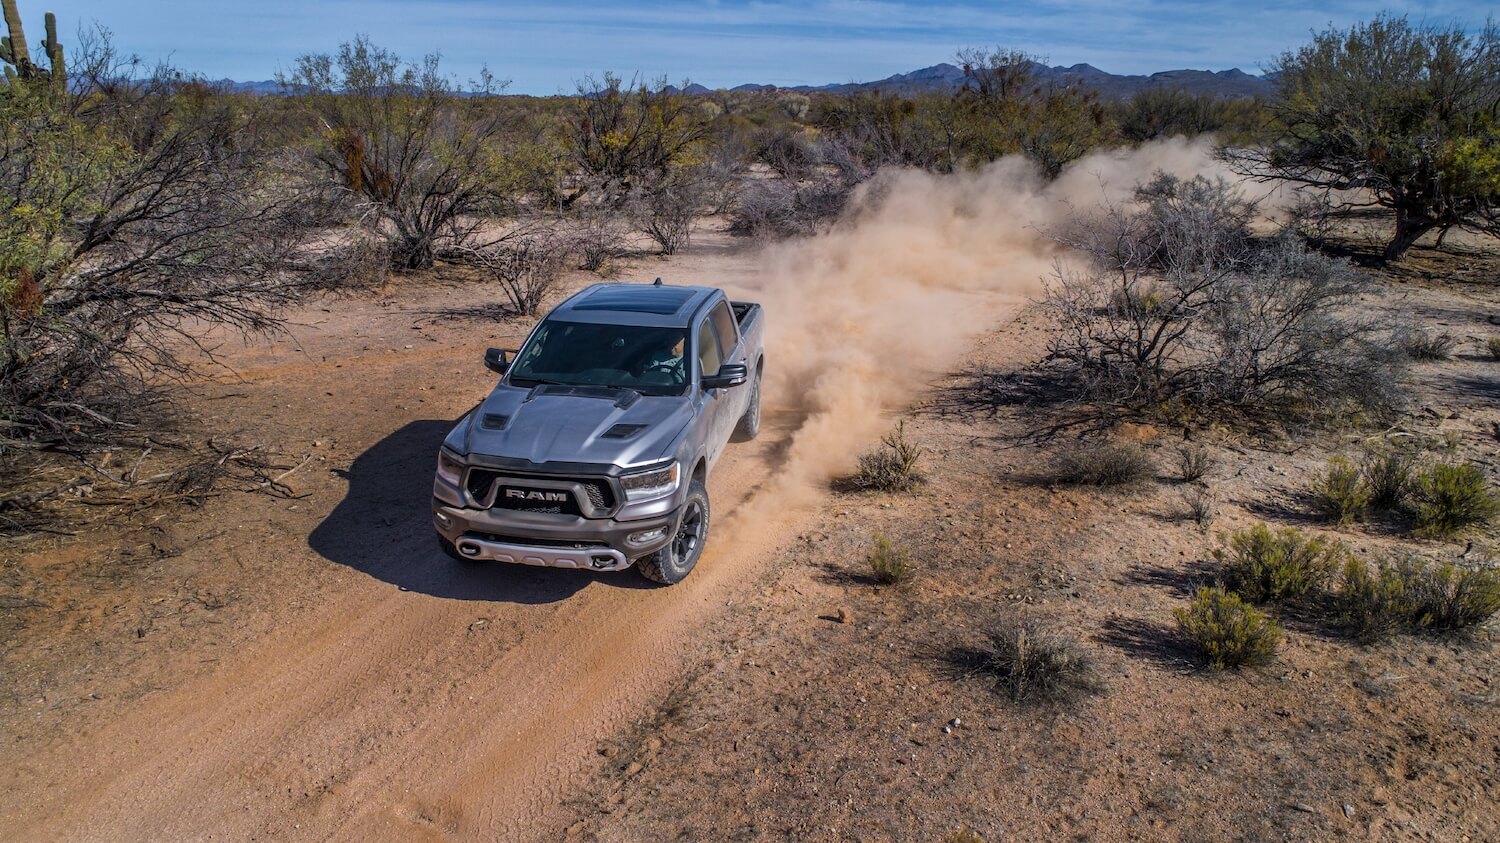 Bird's eye view of a 2023 Ram 1500 proving it's reliable by overlanding through the desert, vegetation visible on either side of it.